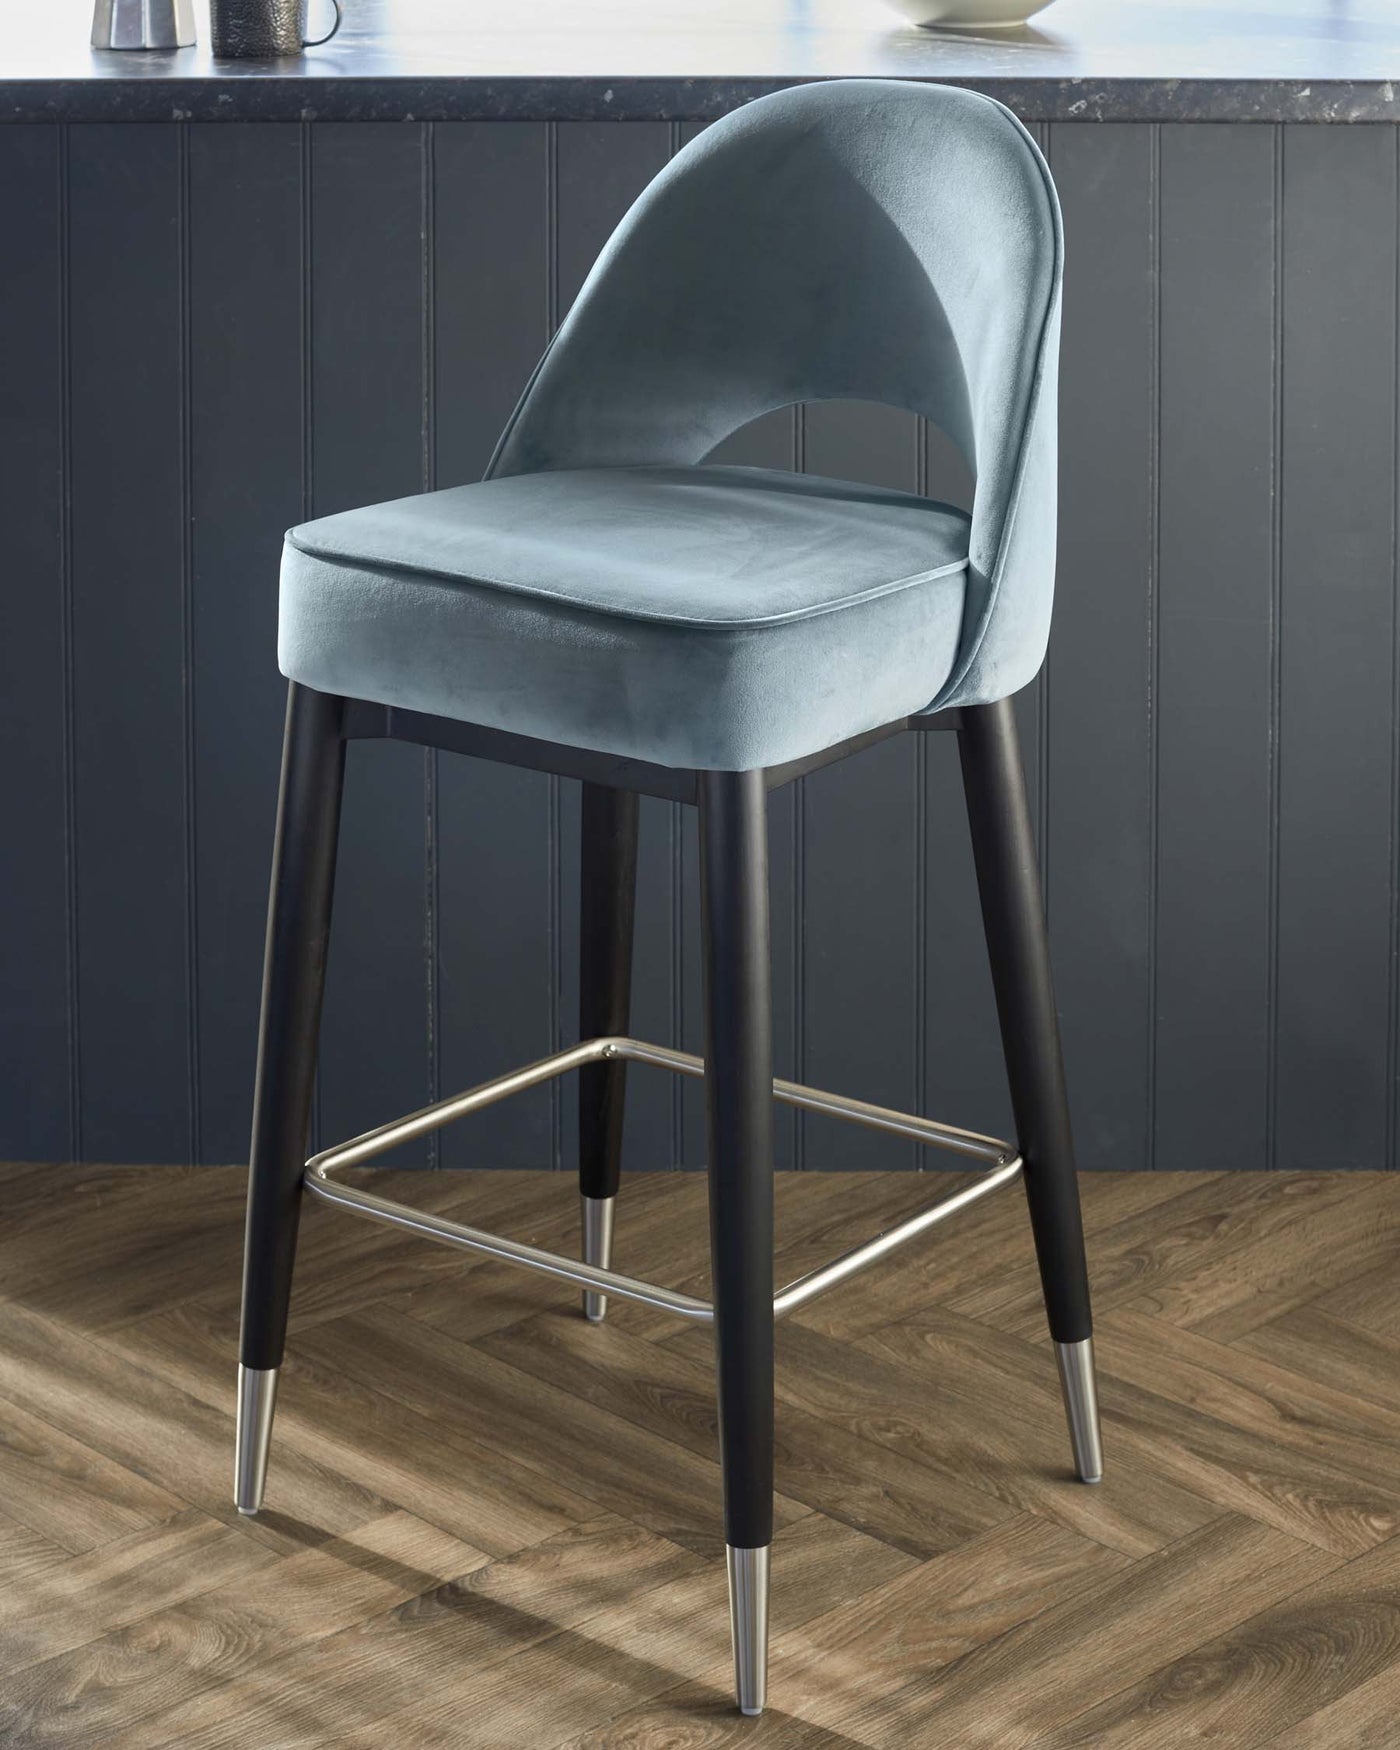 Elegant contemporary bar stool with plush teal velvet upholstery, featuring a curved backrest and a padded seat for comfort. The stool stands on tapered black legs accented with sleek metallic tips and a matching footrest, creating a stylish contrast. Perfect for modern kitchen or bar settings.